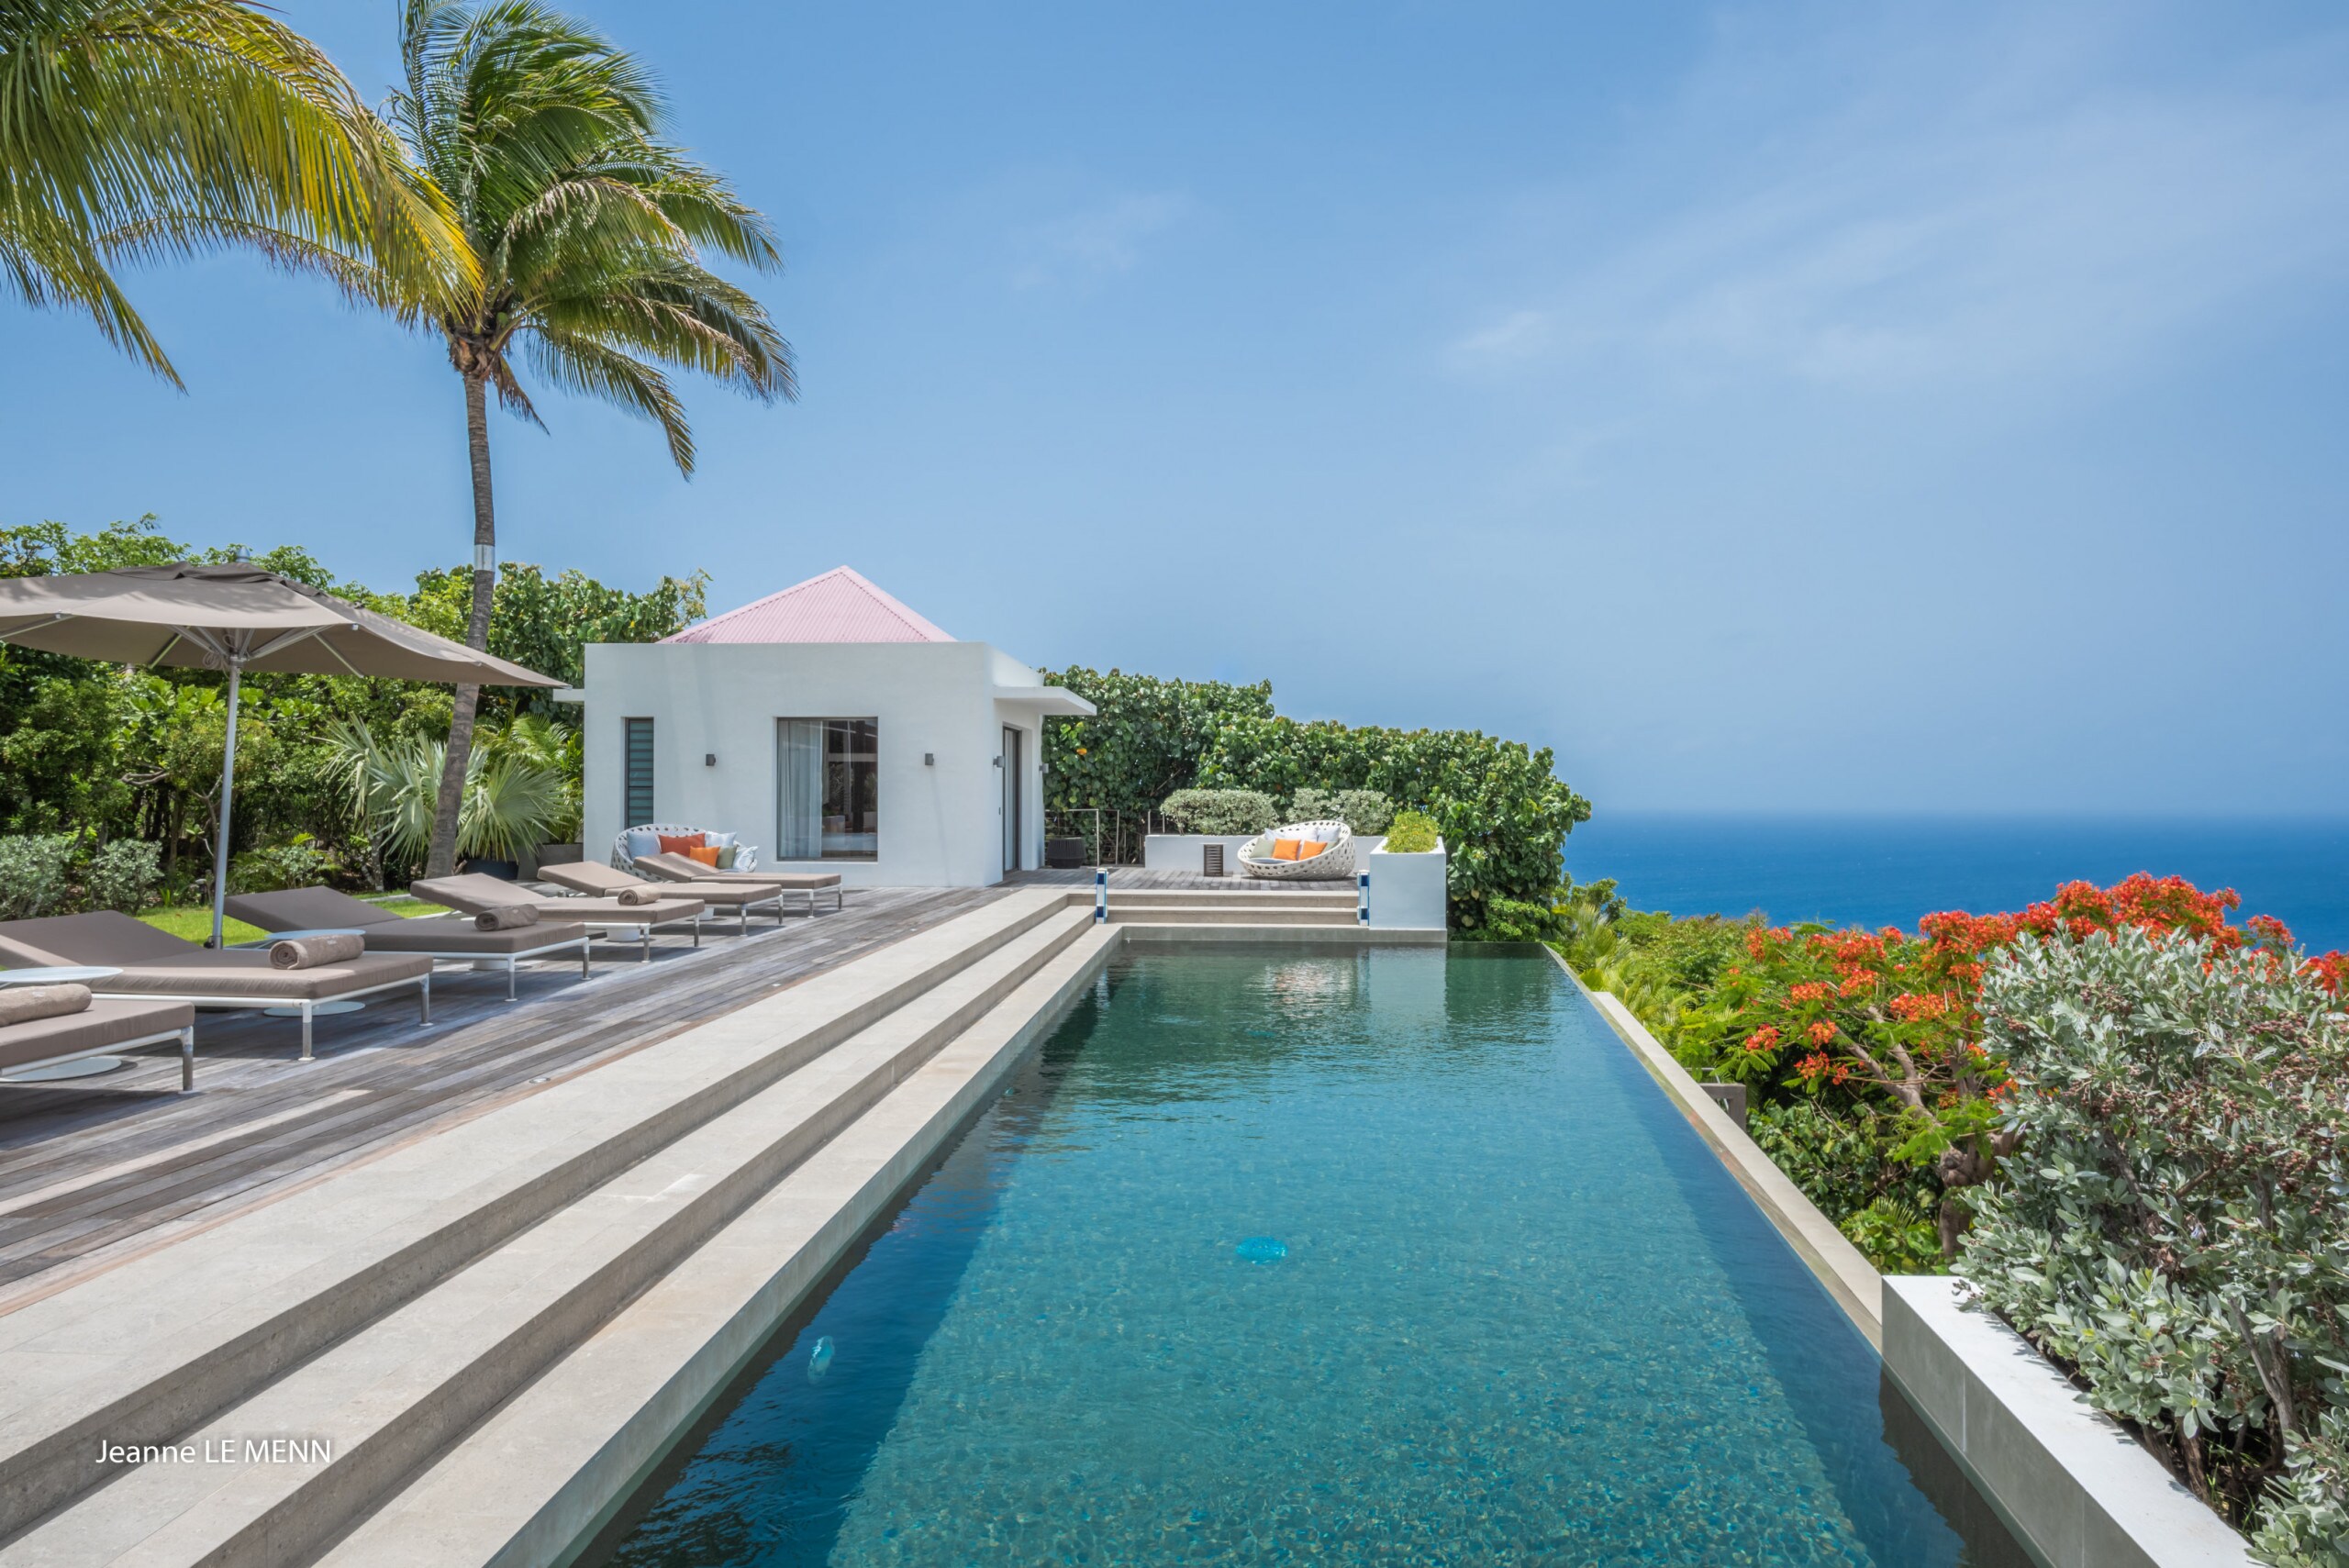 Heated pool with beautiful ocean views, expansive terrace with loungers and deckchairs.&nbsp;